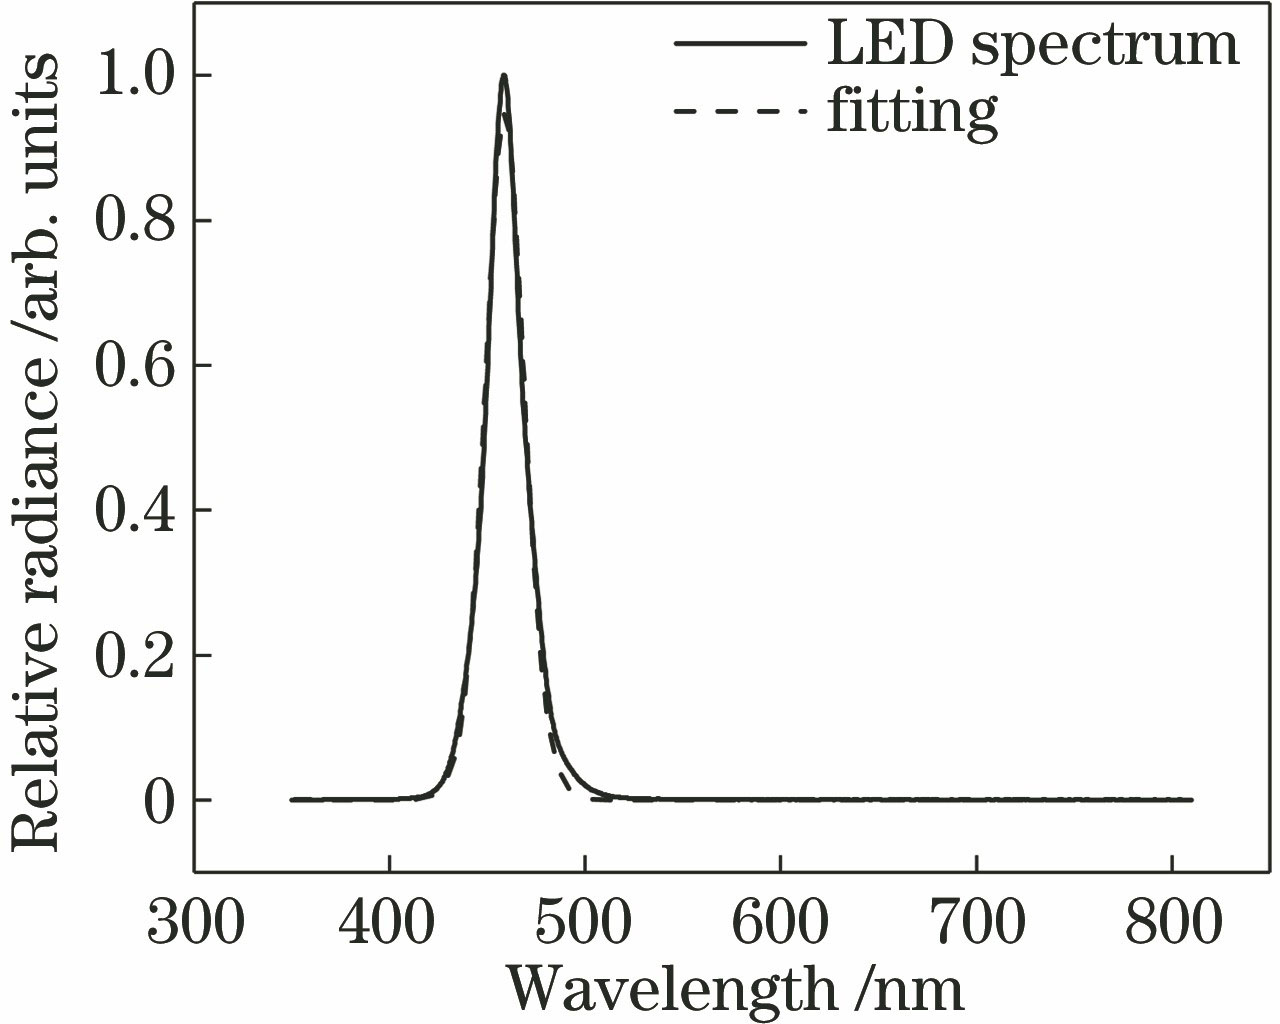 460 nm LED spectra fitting by spectral radiation model